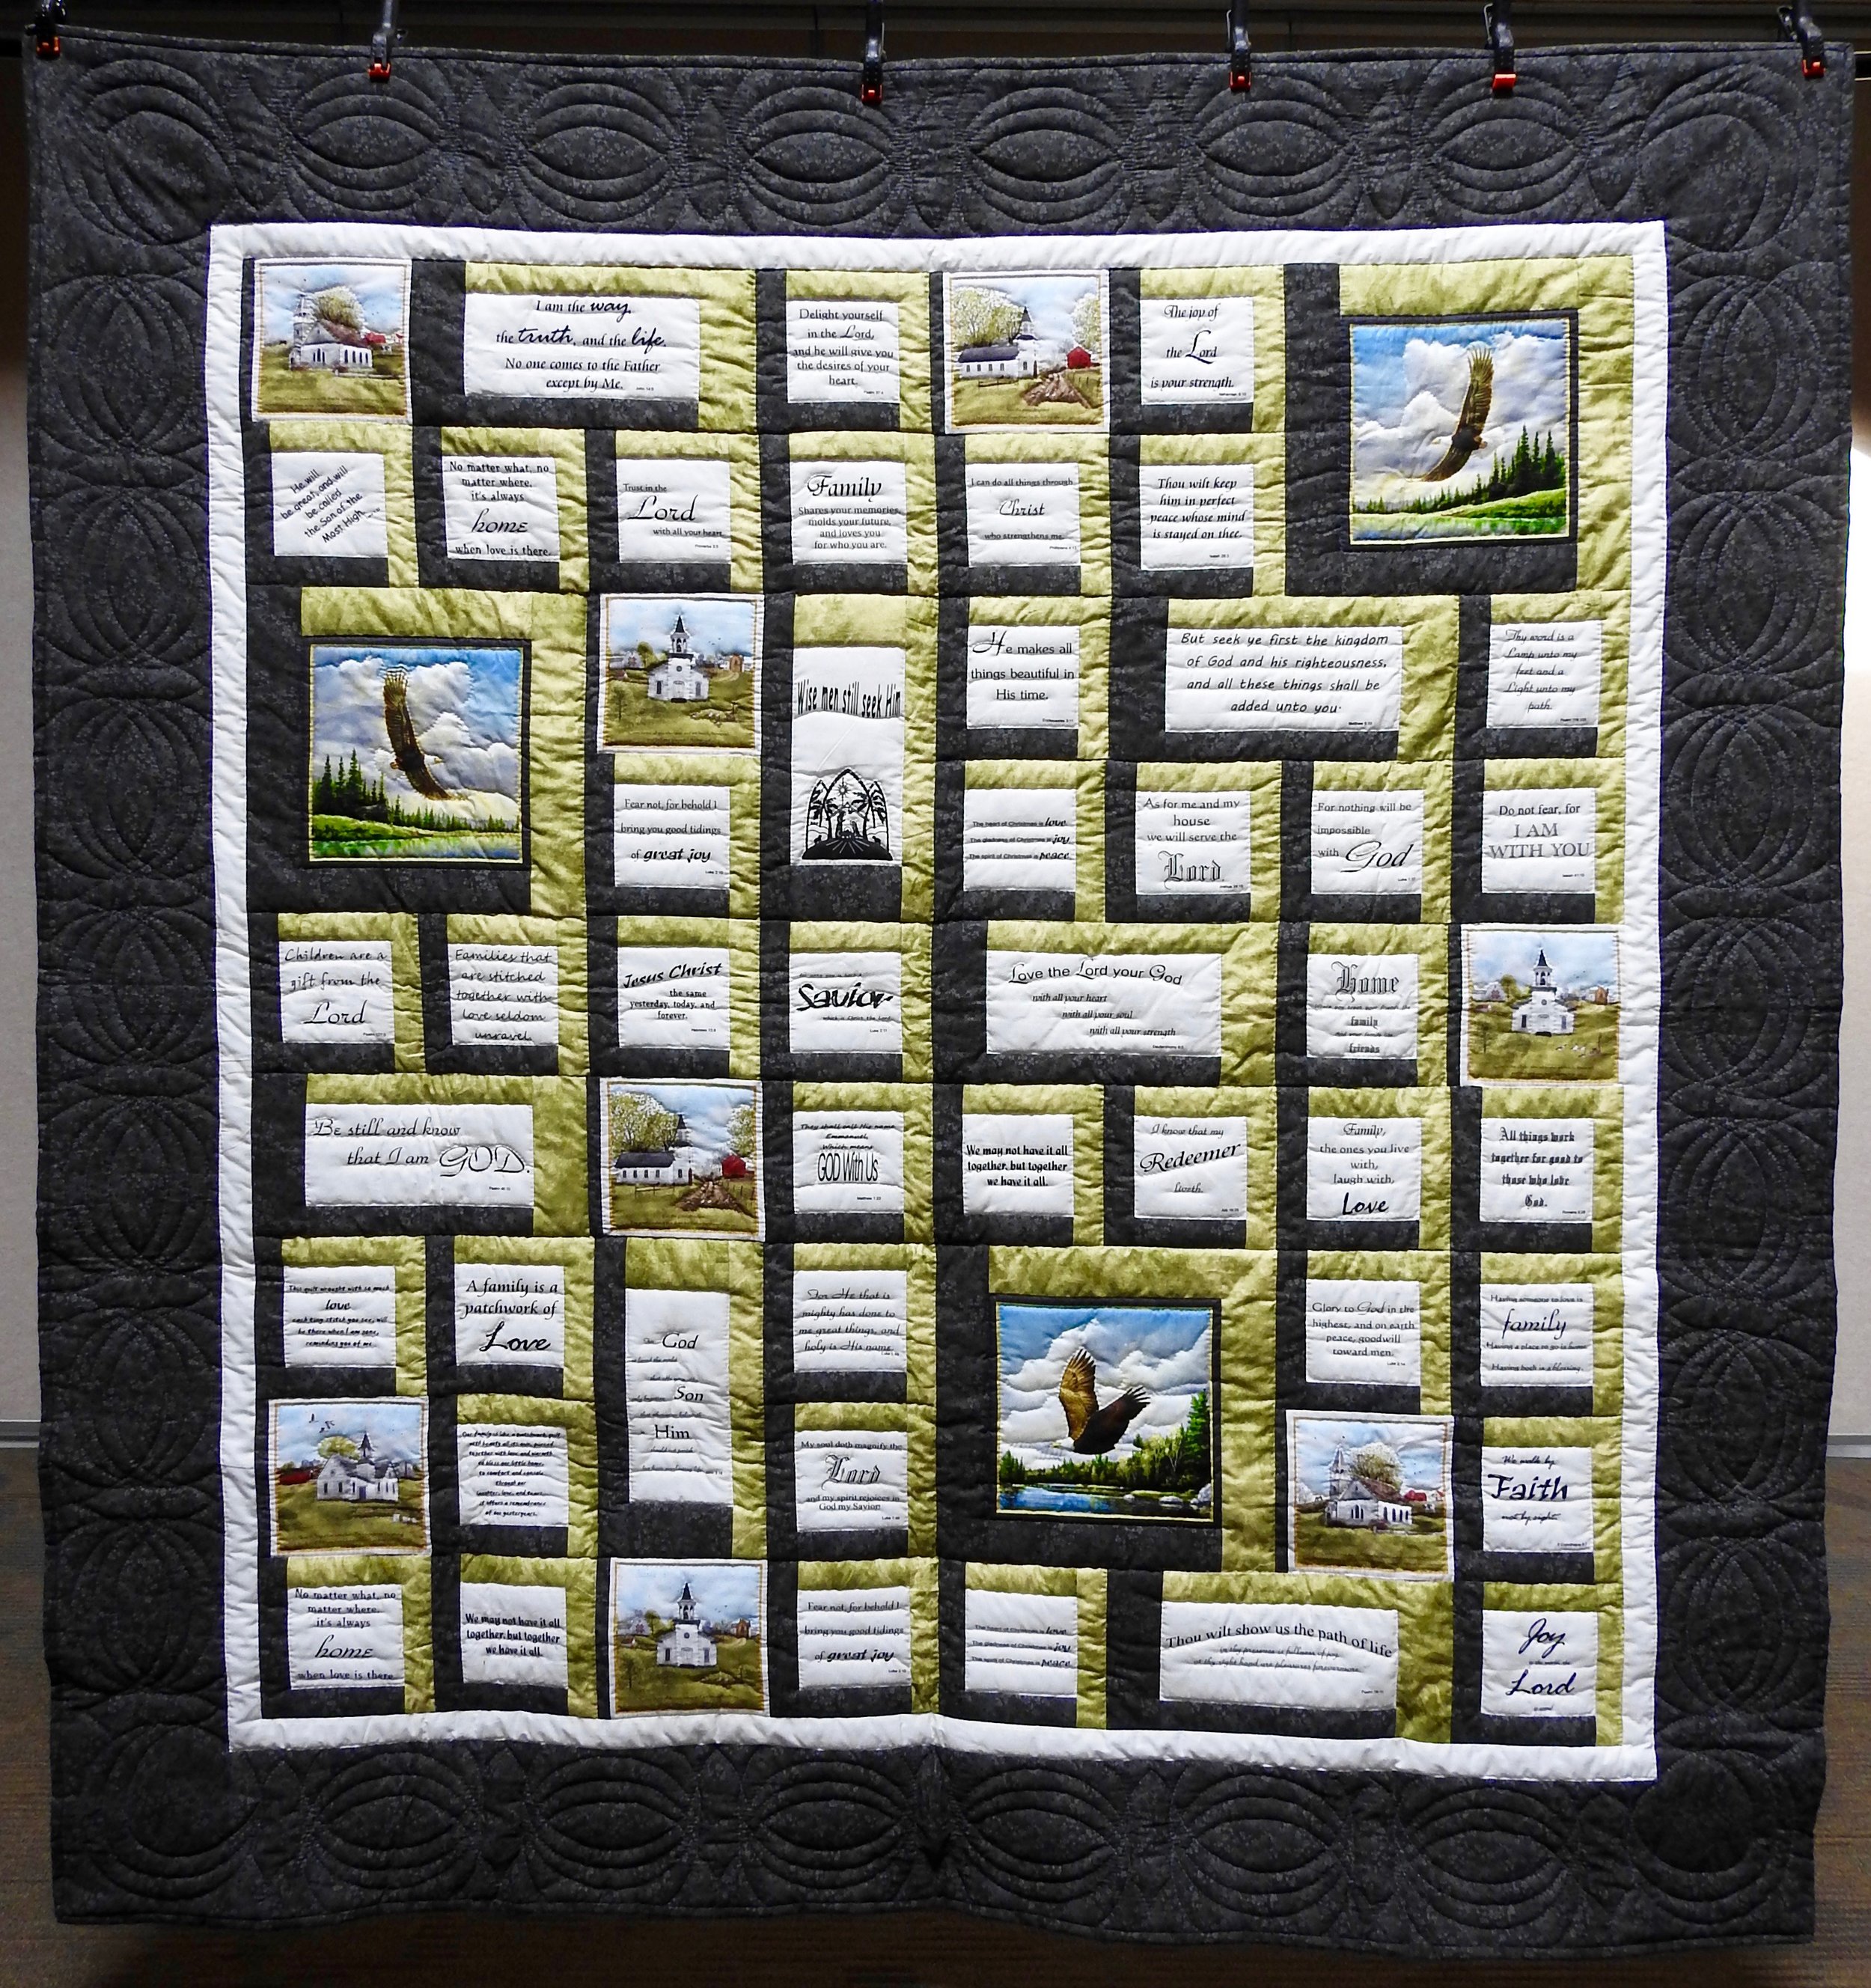  Bible Verses, Pieced, Pre=printed Panels, Hand Quilted, donated by the Crafty Ladies of Manor 2-Greencroft, 80 x 84”